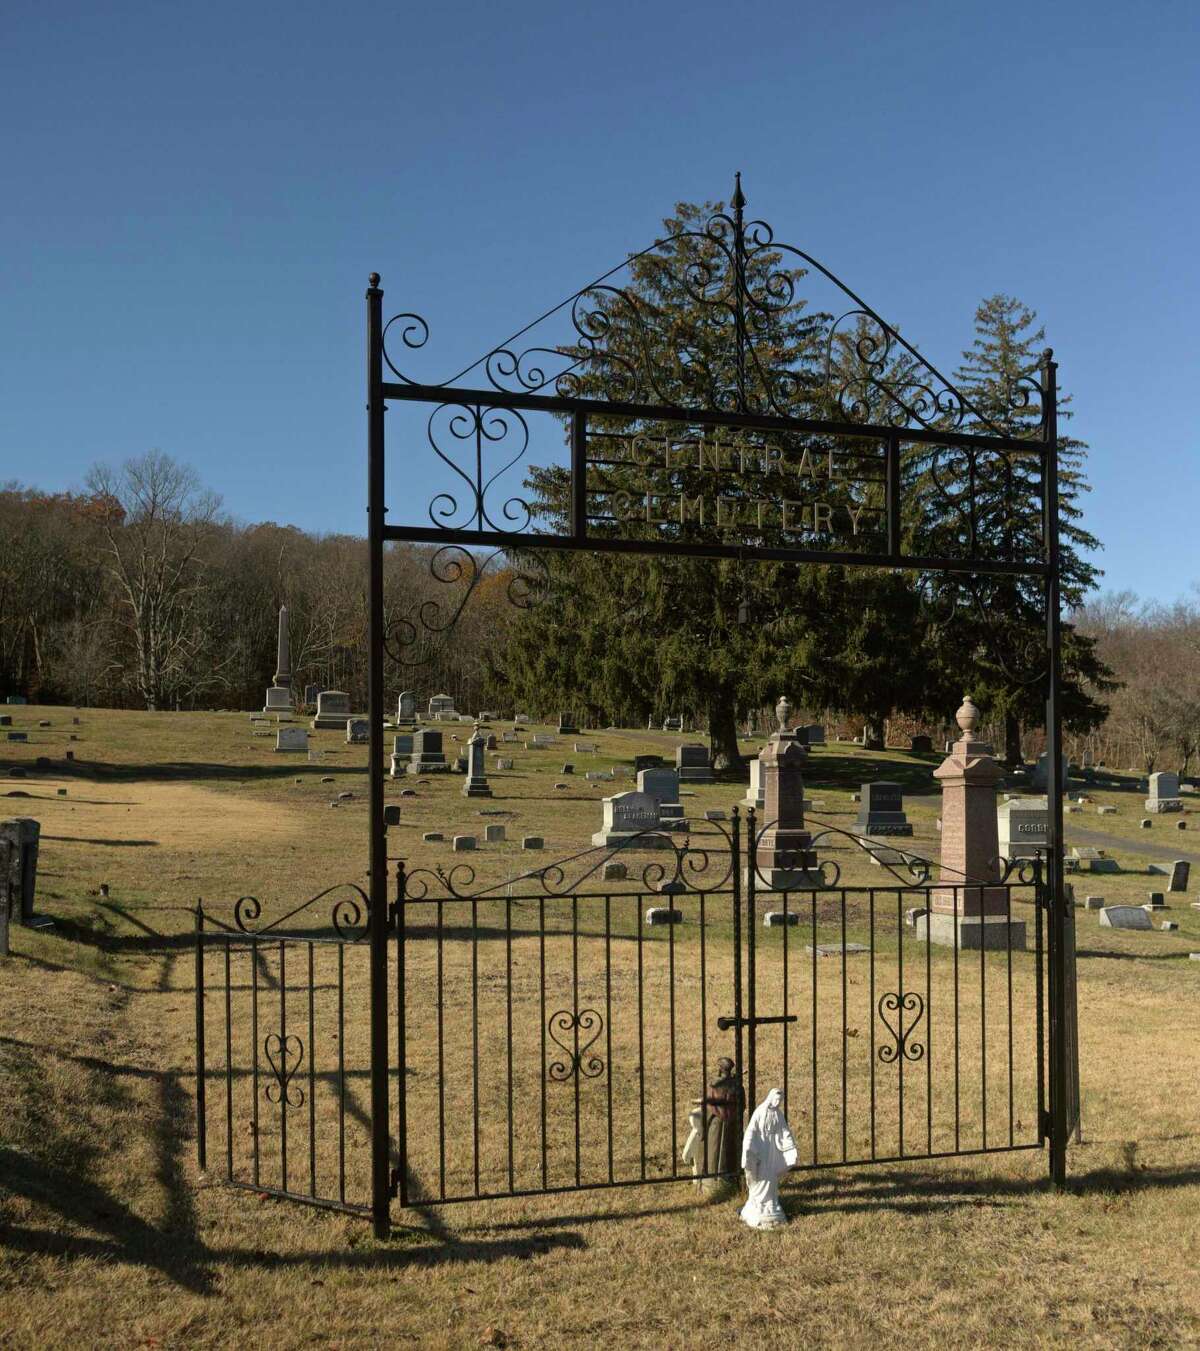 Central Cemetery in Brookfield. Thursday morning, November 21, 2019, in Brookfield, Conn.